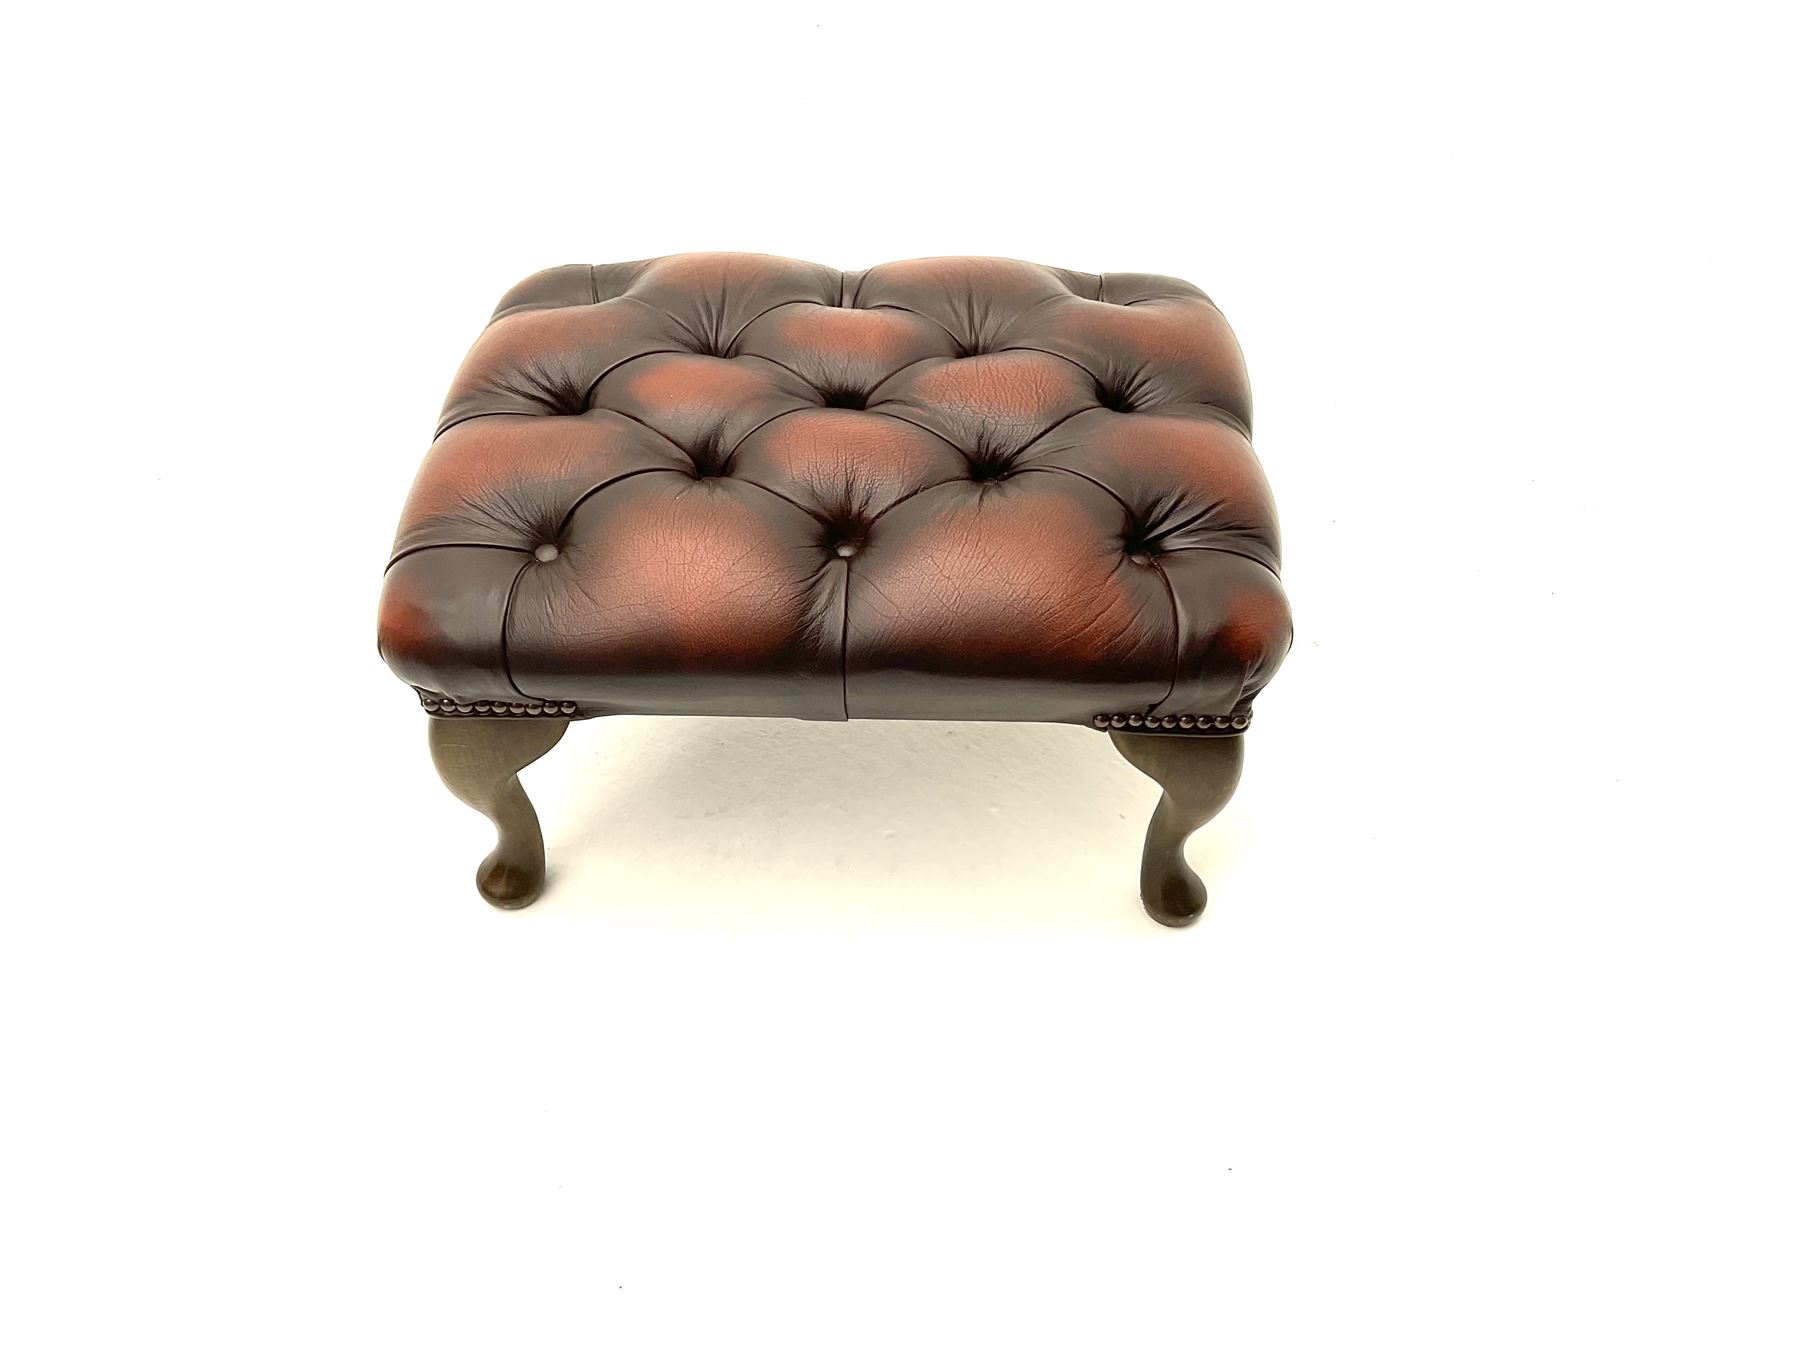 Rectangular studded footstool upholstered in deep buttoned brown leather - Image 2 of 2